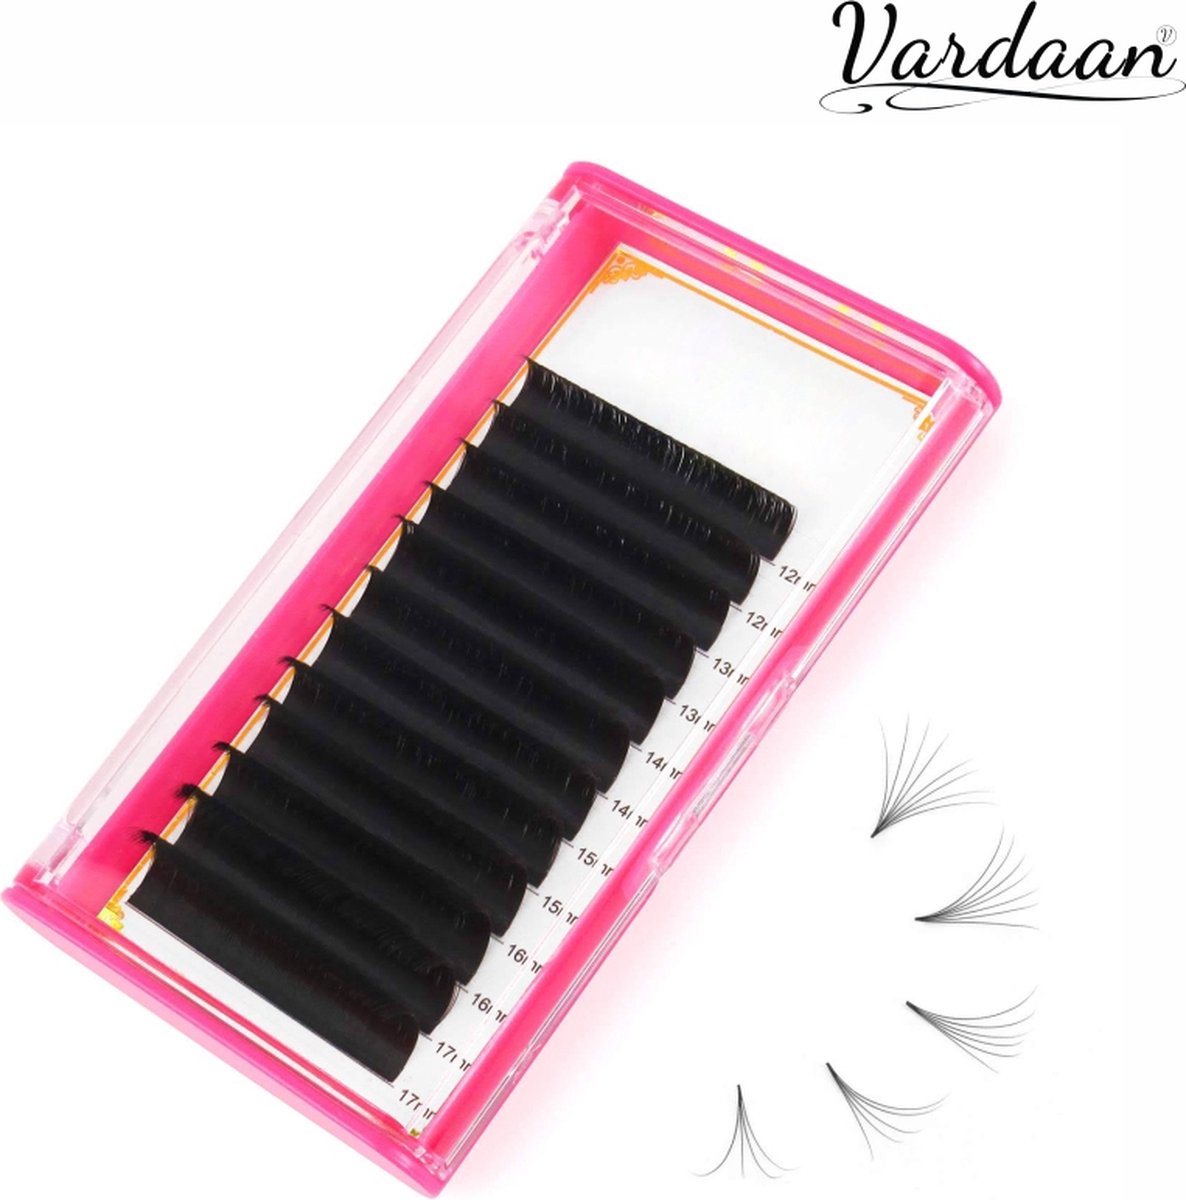 Vardaan wimperextensions - lashes C 0.07 - 11 mm -Nep wimpers - Valse wimpers - Zwart - wimper extension - Stijlvol - Fake eyelashes